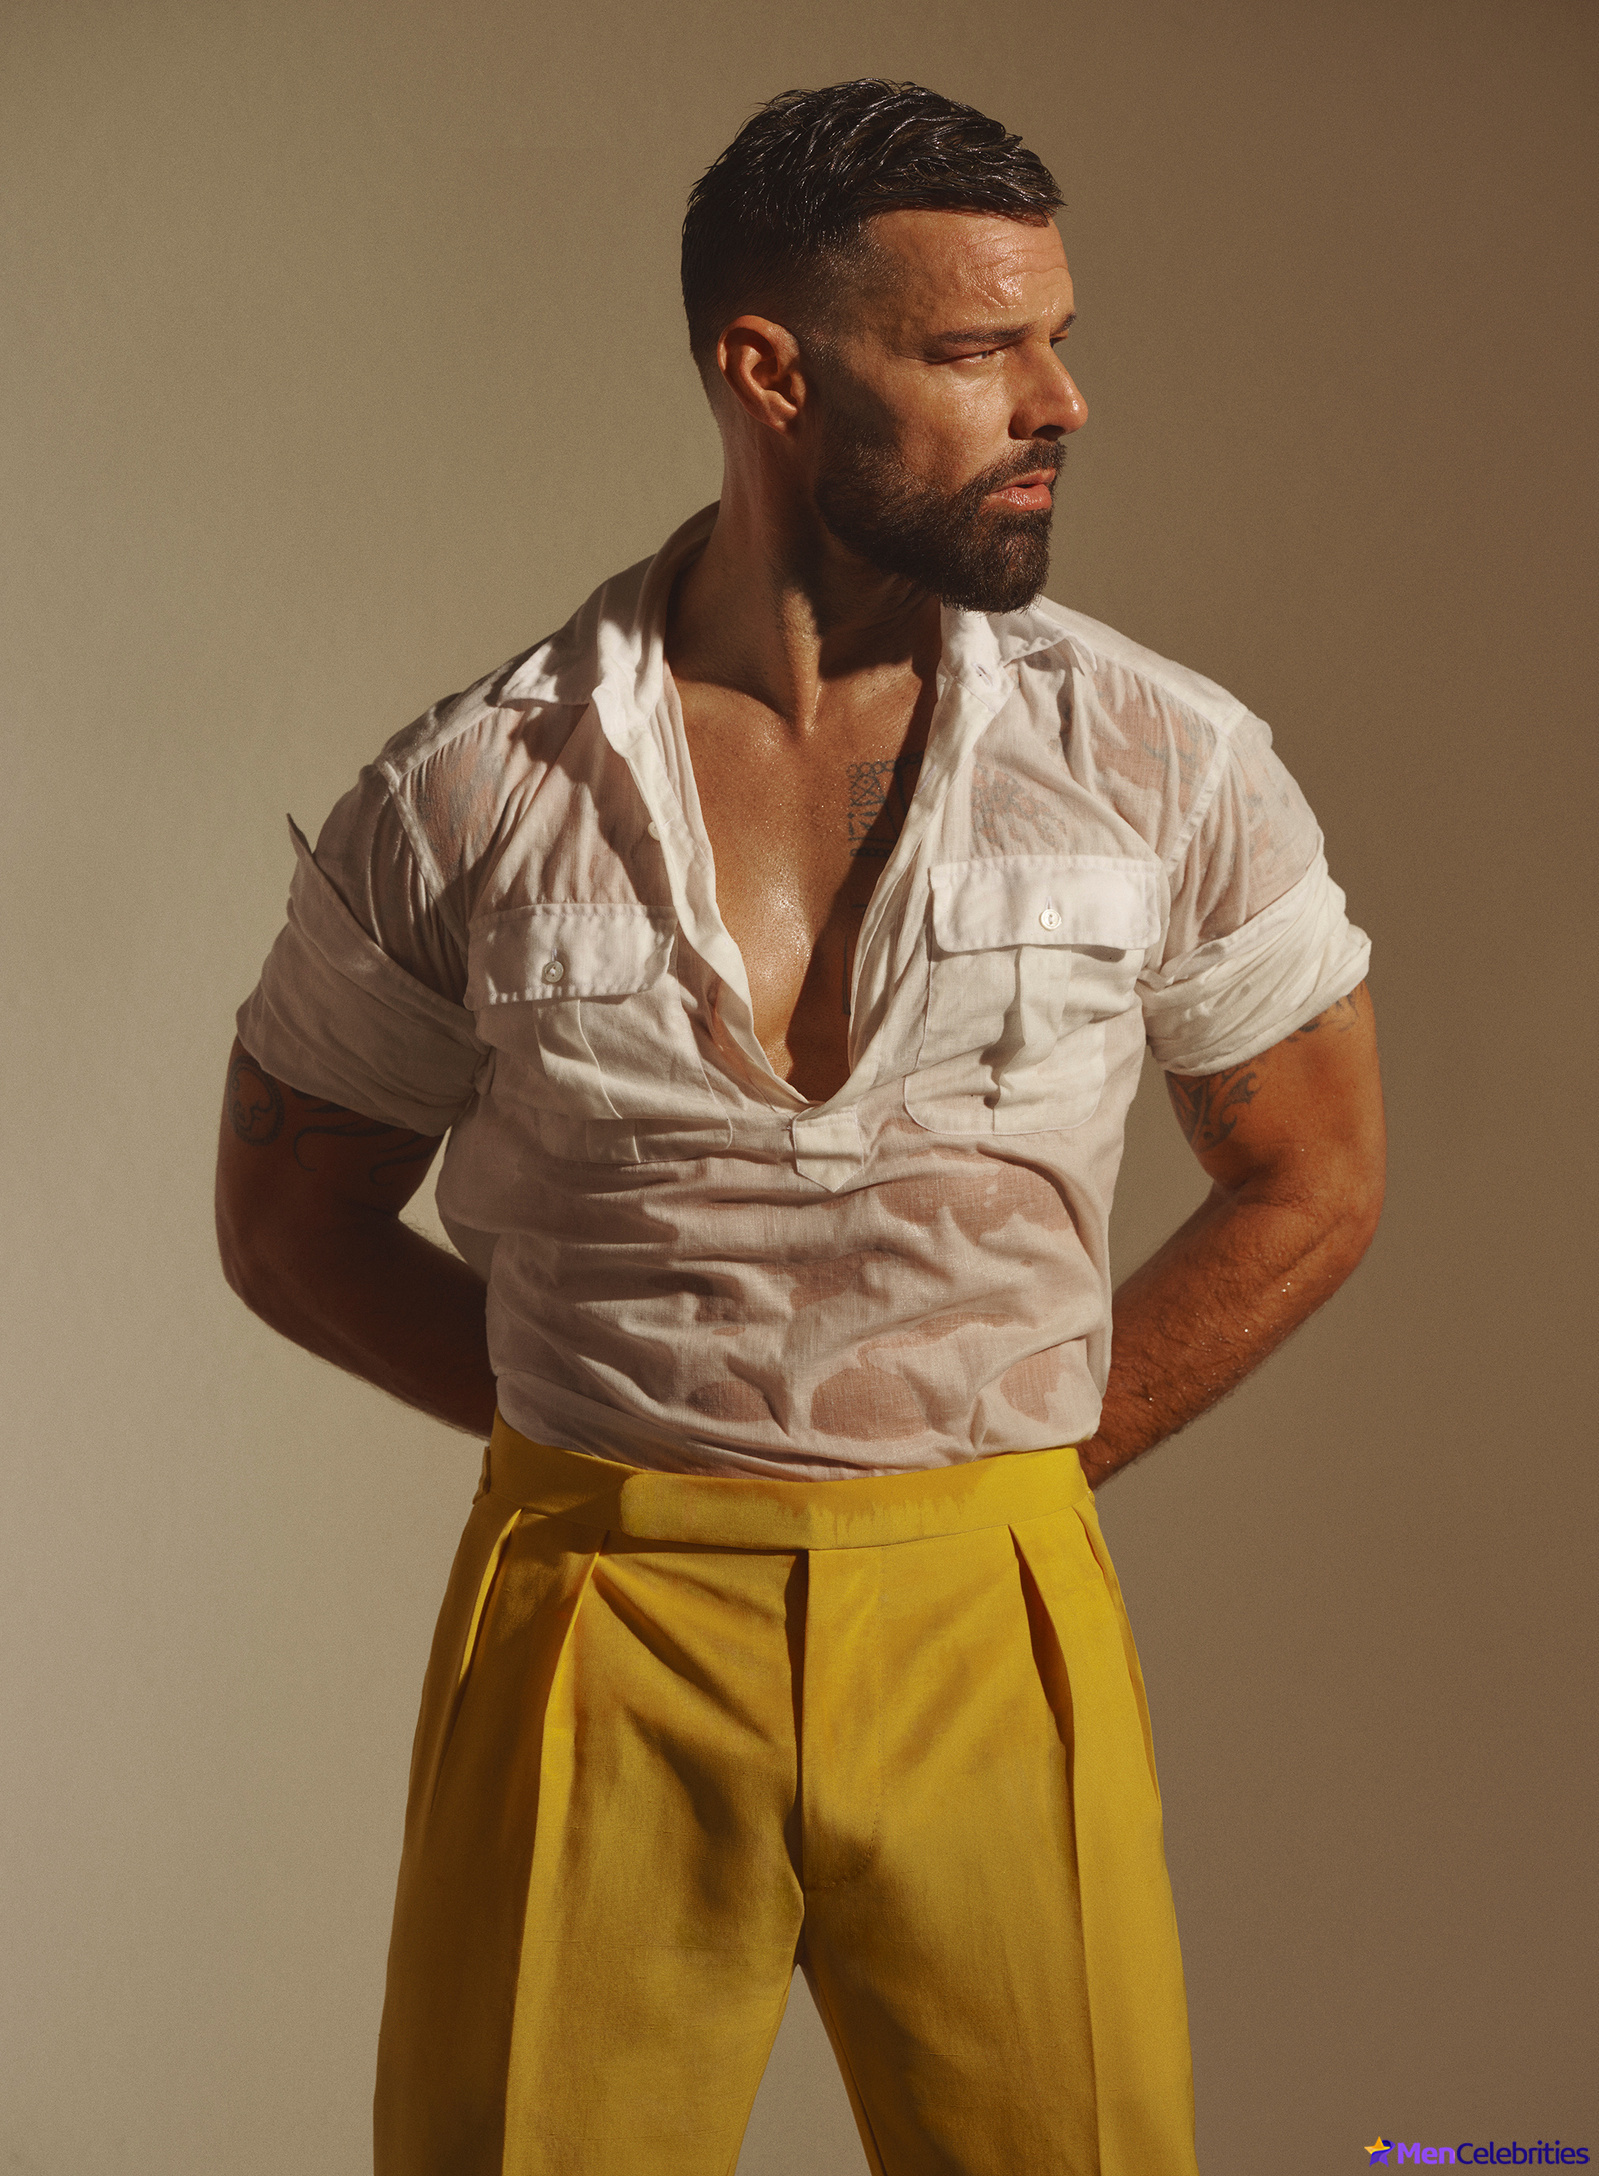 Ricky Martin’s Courageous Coming Out Story